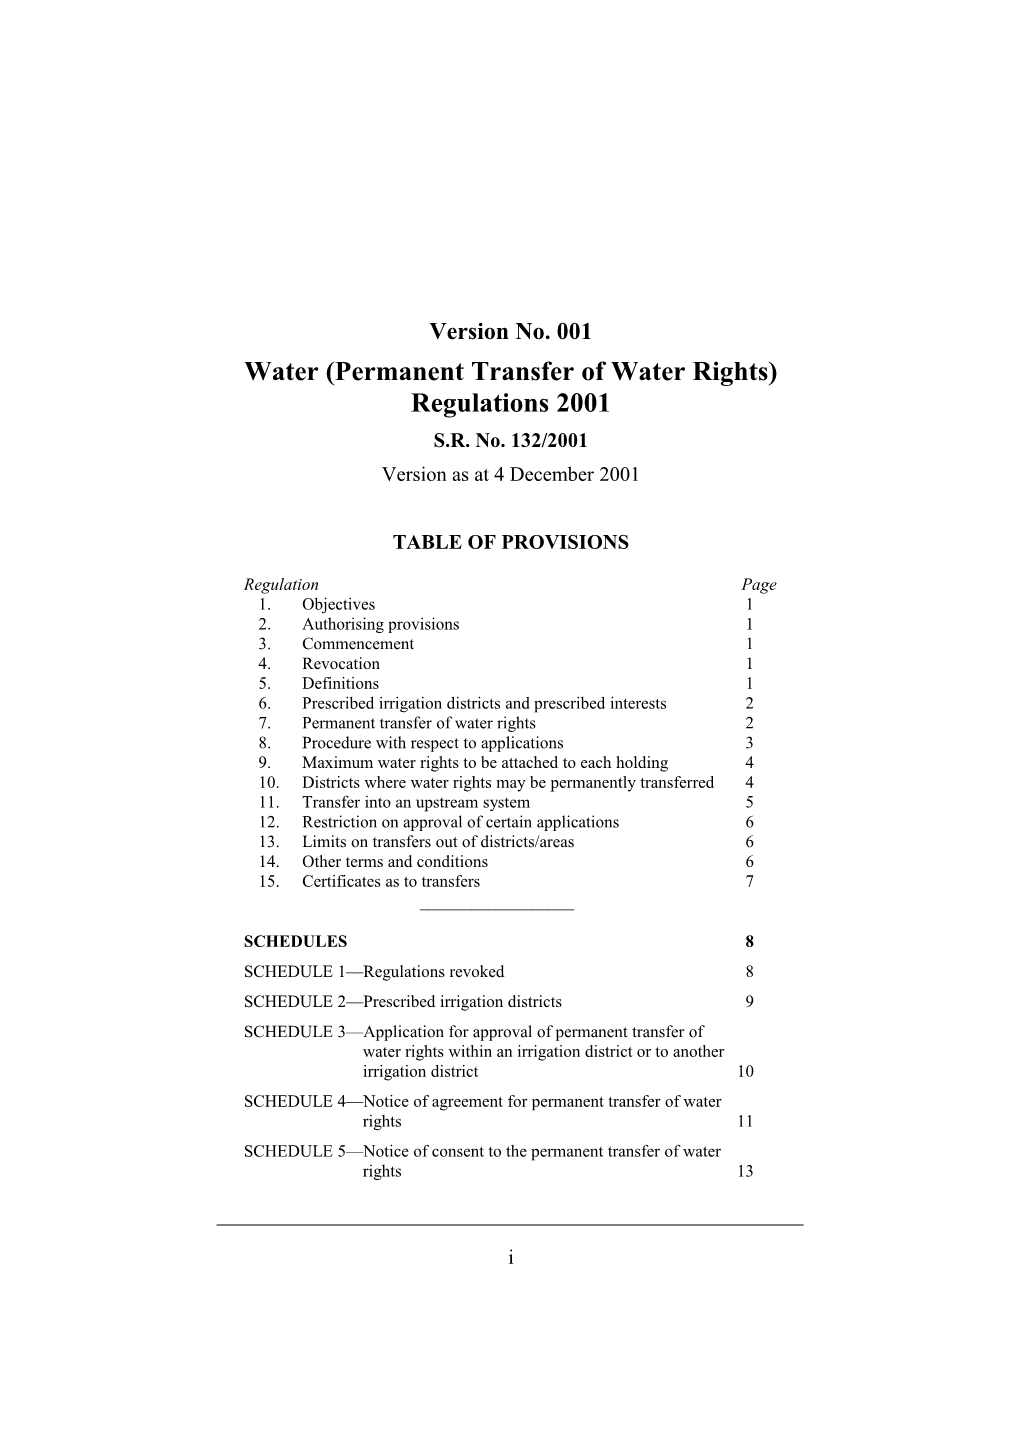 Water (Permanent Transfer of Water Rights) Regulations 2001